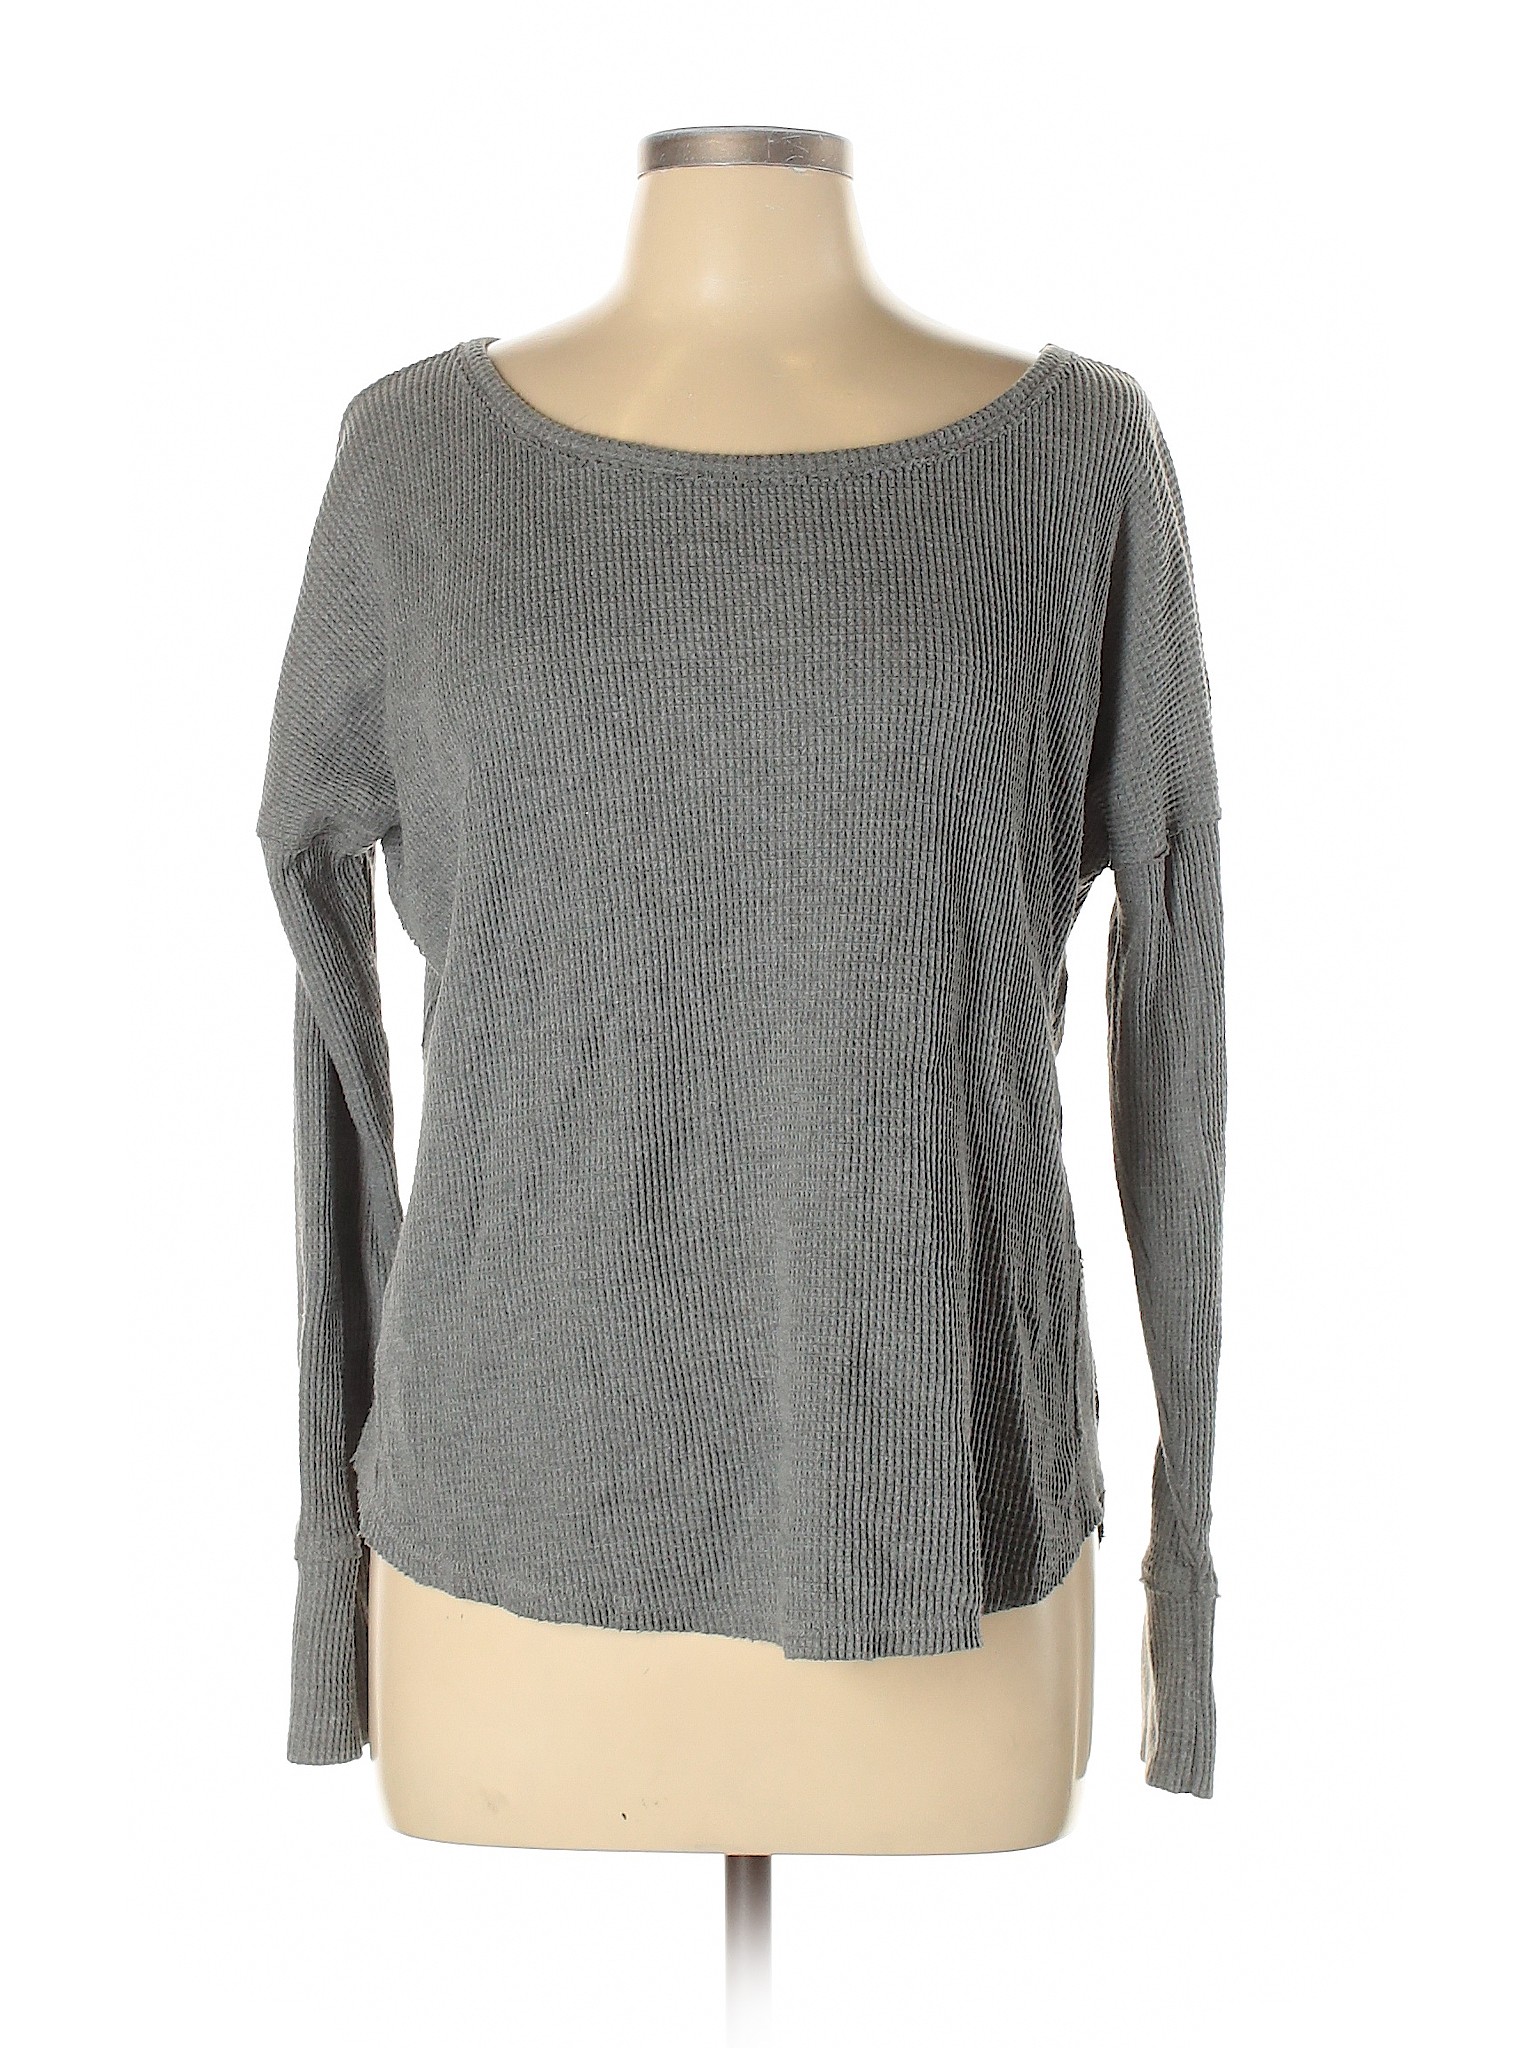 Abercrombie & Fitch Women Gray Pullover Sweater L | eBay